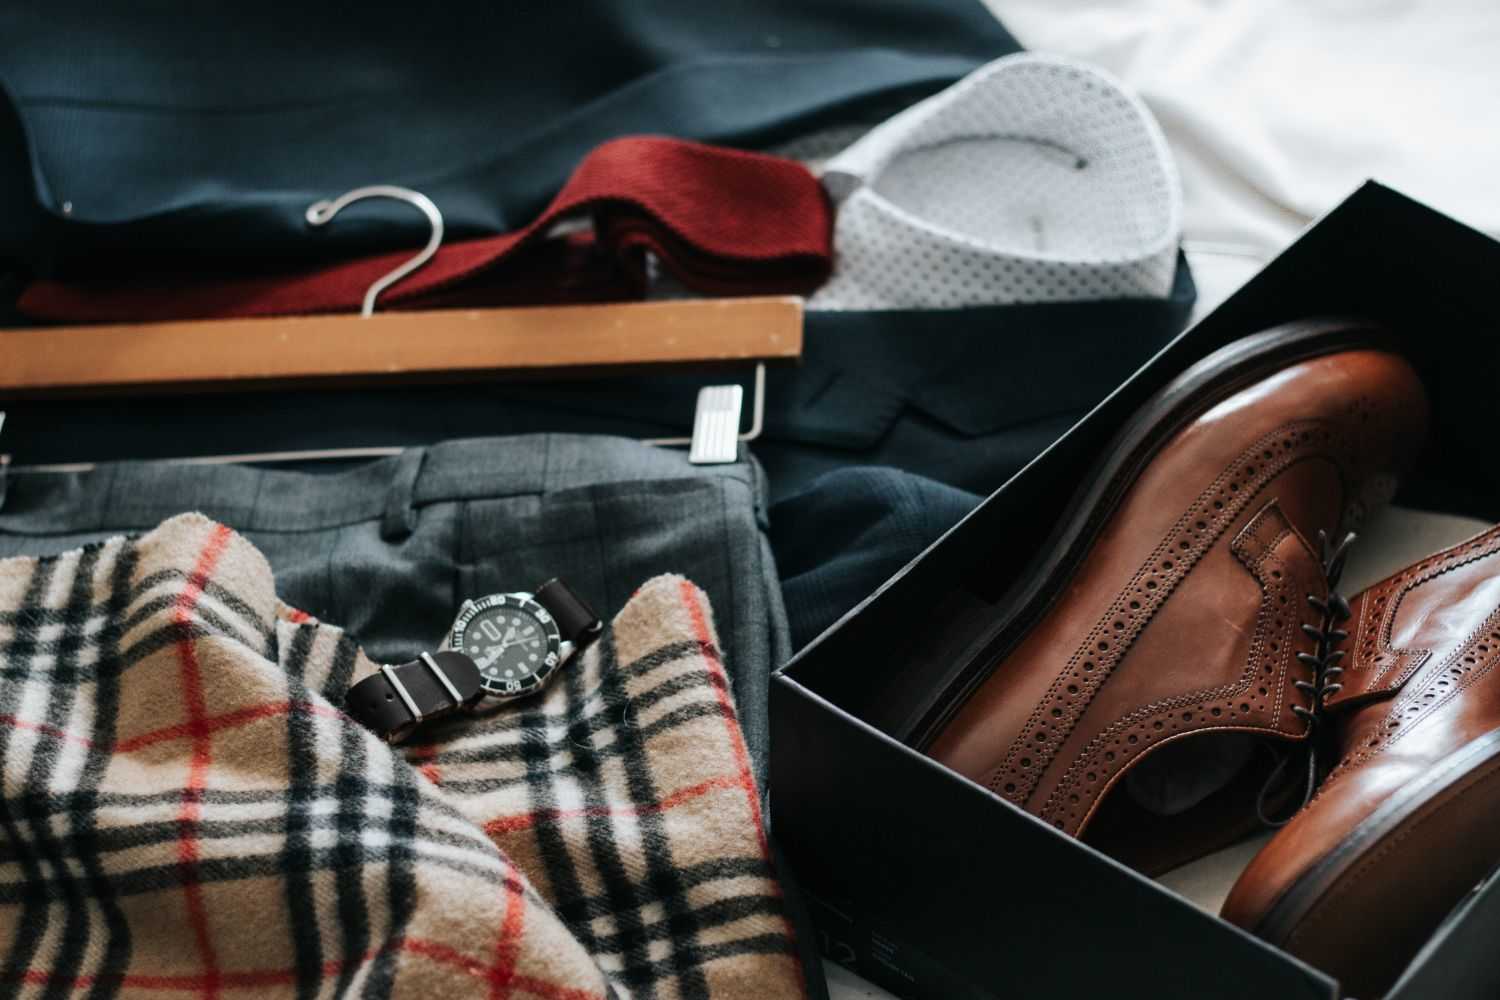 shoes,clothes and scarf on the desk Photo by David Lezcano on unsplash